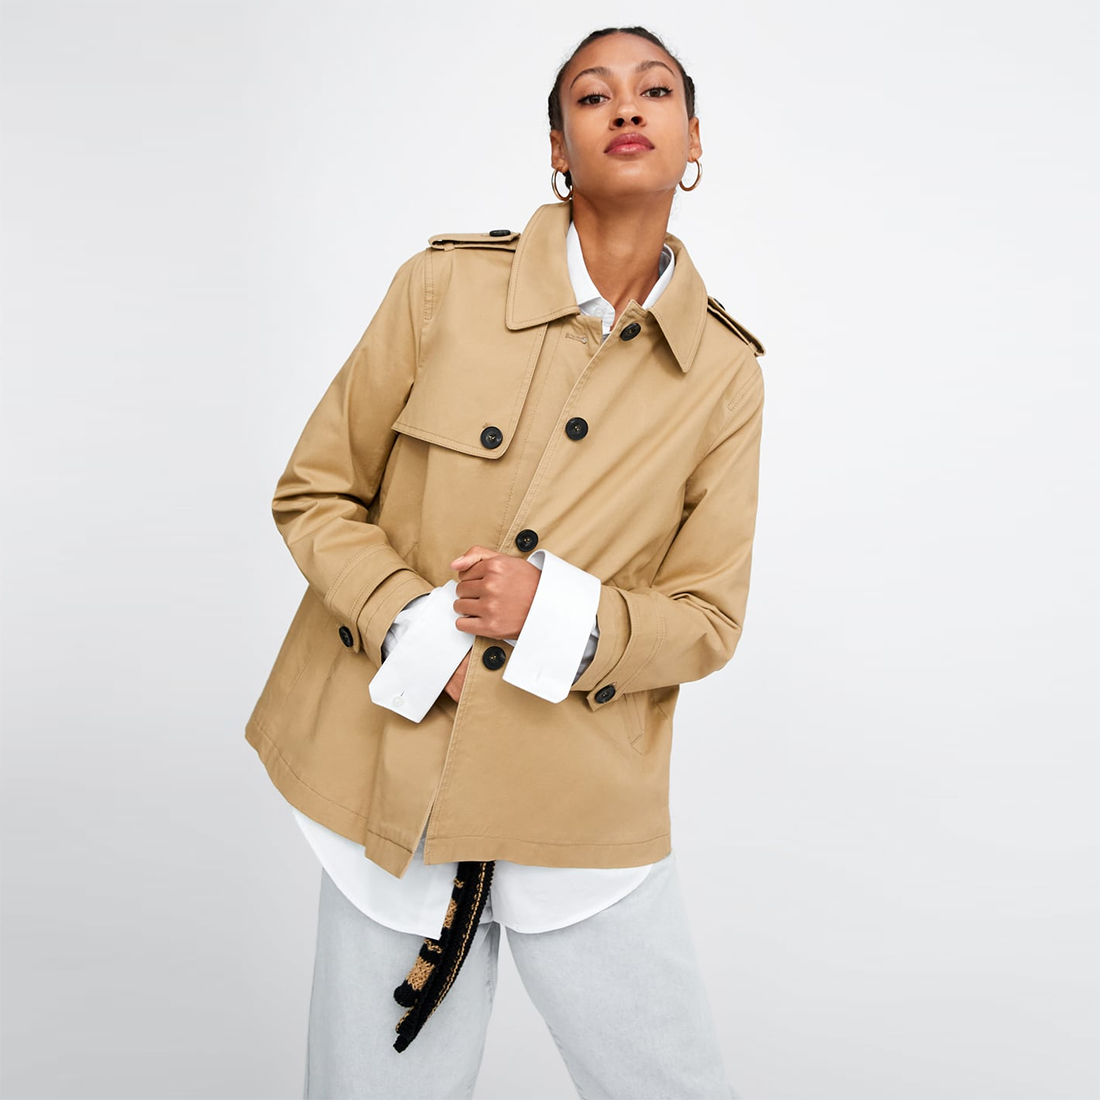 15 spring coats you need right now | Hood Magazine